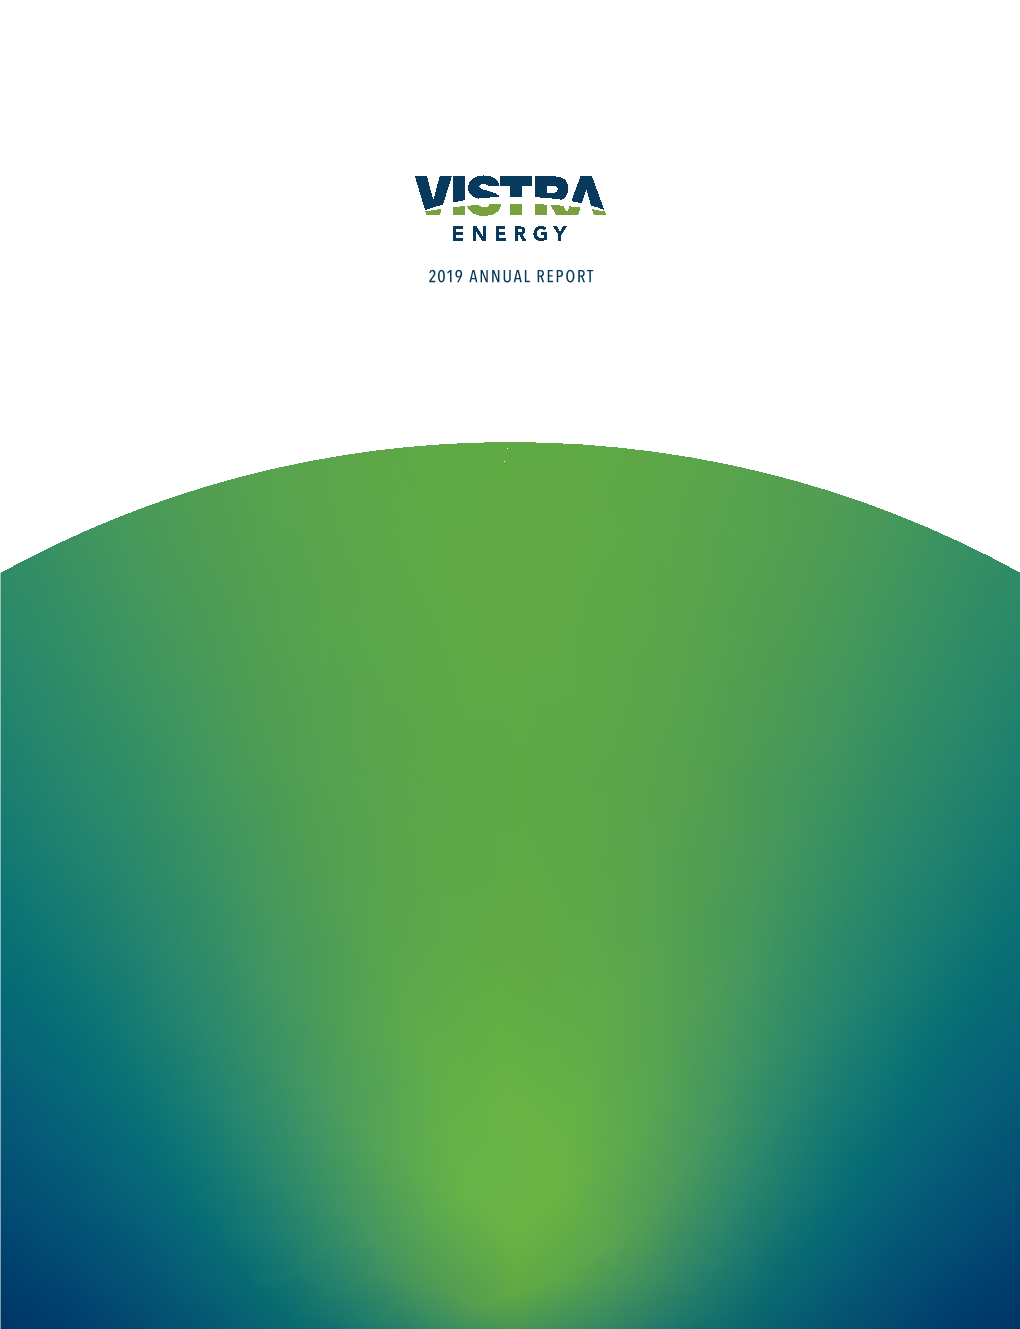 About Vistra Energy